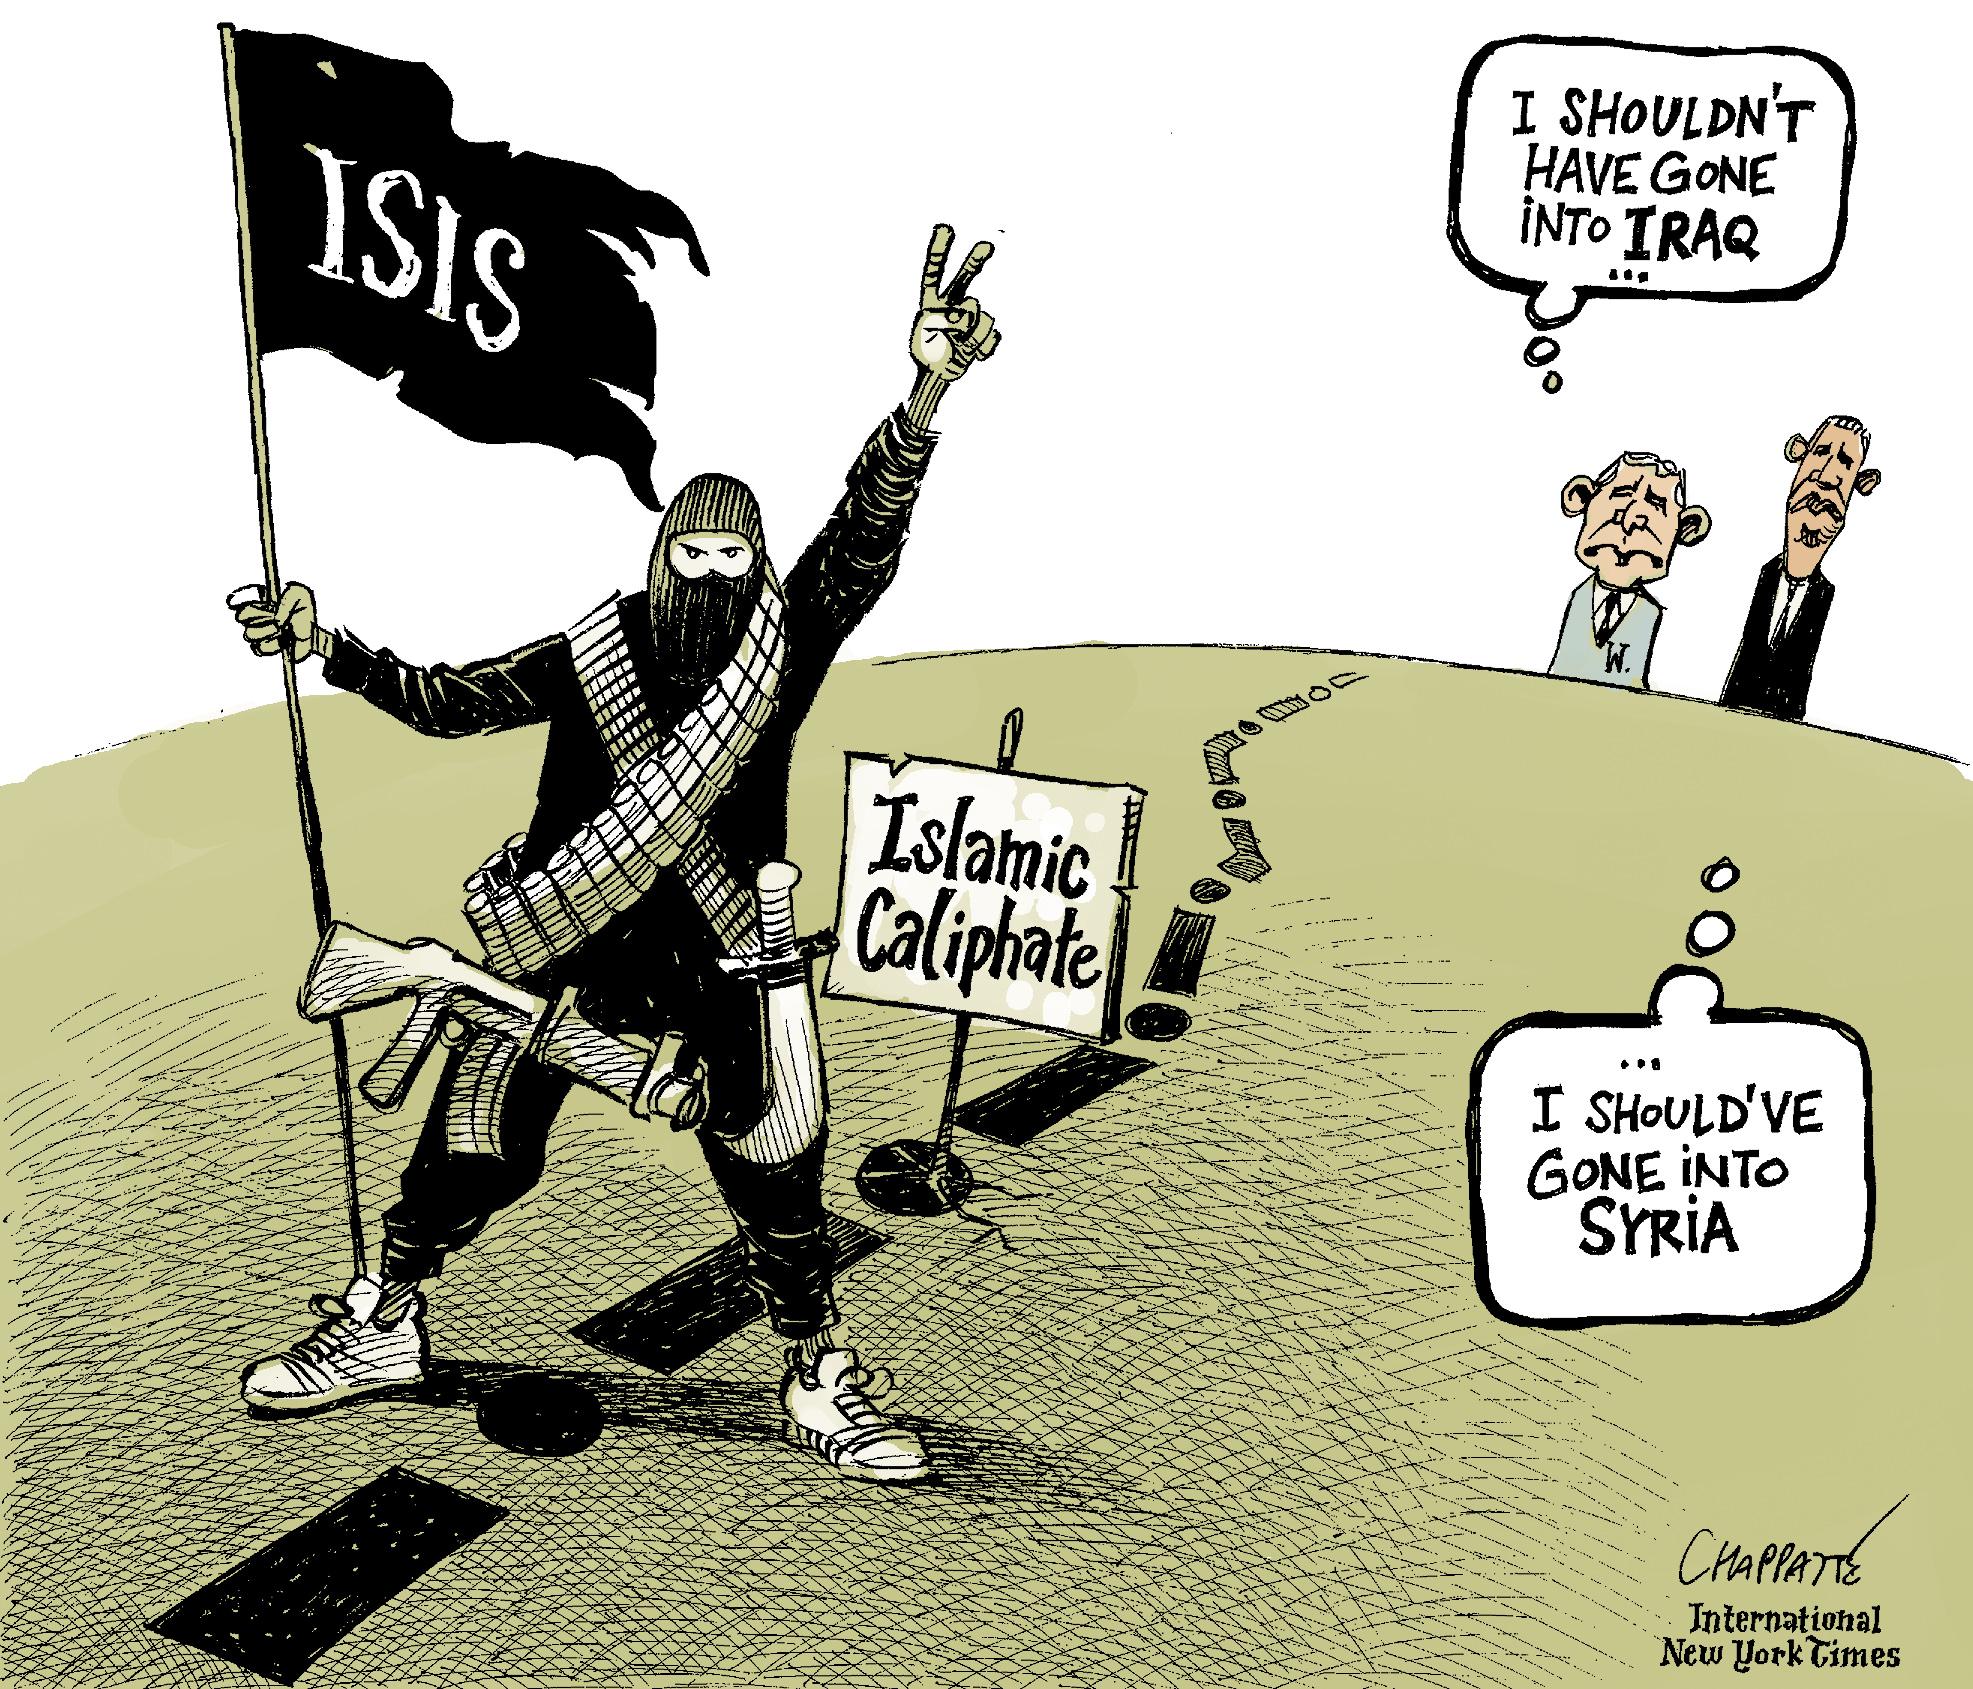 Islamic State of Iraq and Syria